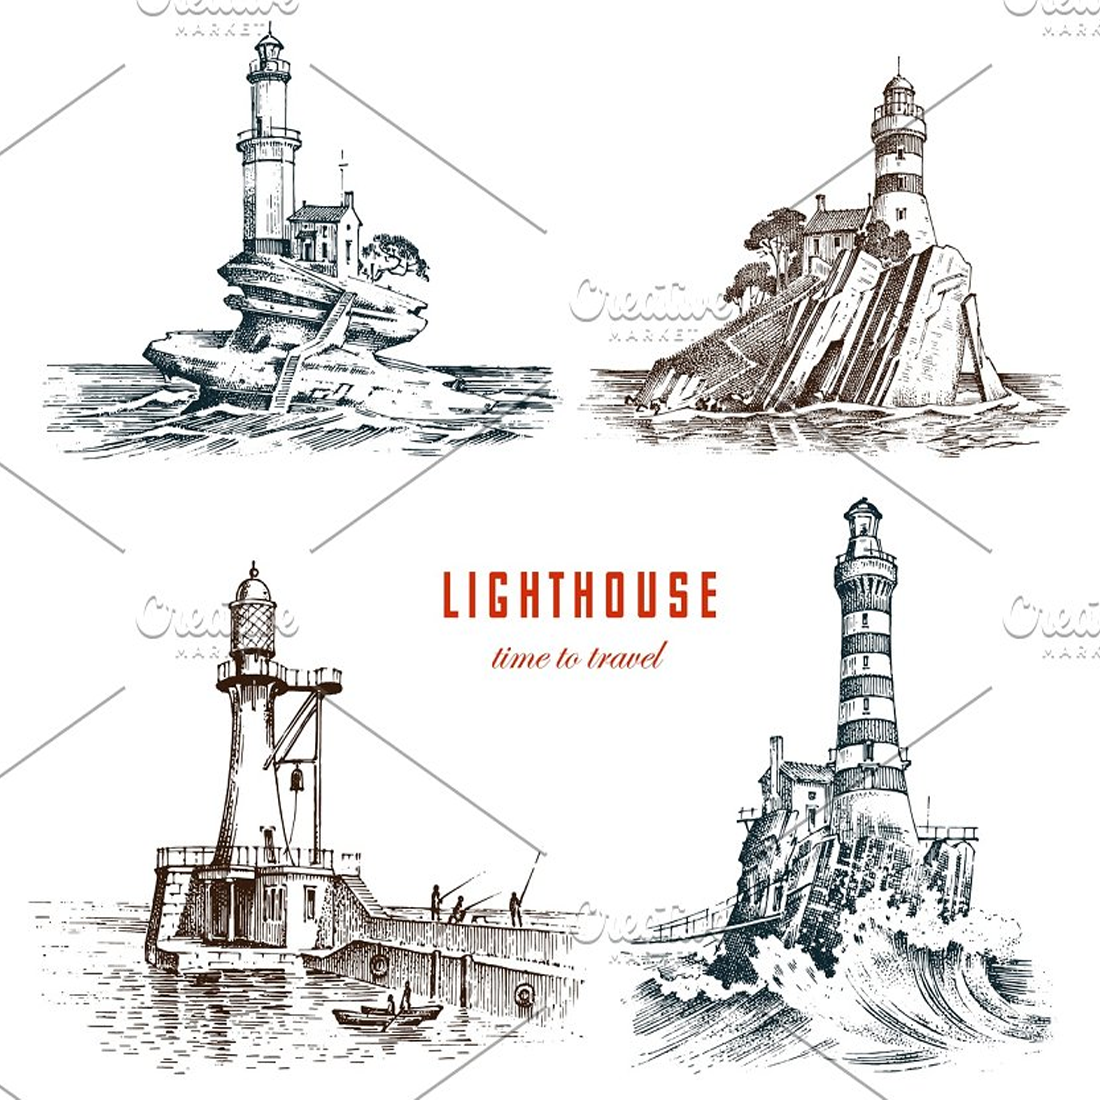 Images preview lighthouse and sea. marine sketch.